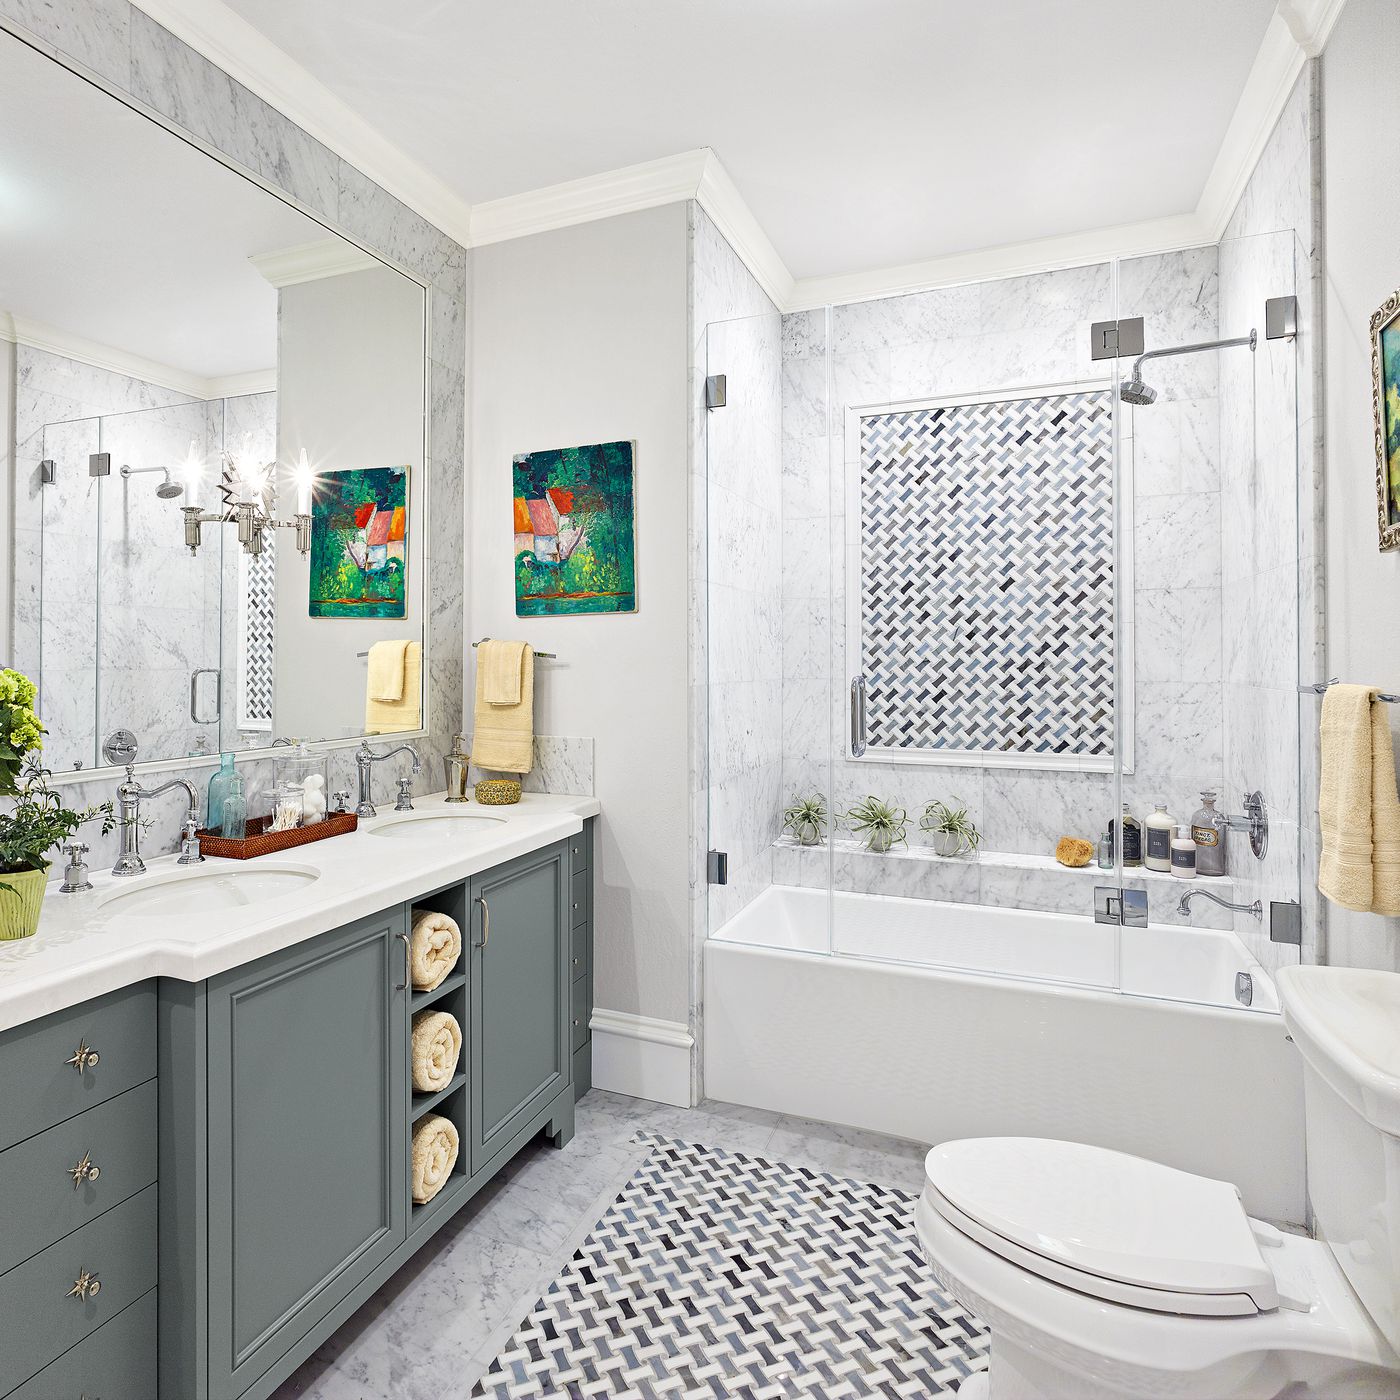 Before and After: A Small Bath Gets an Artful Upgrade - This Old House